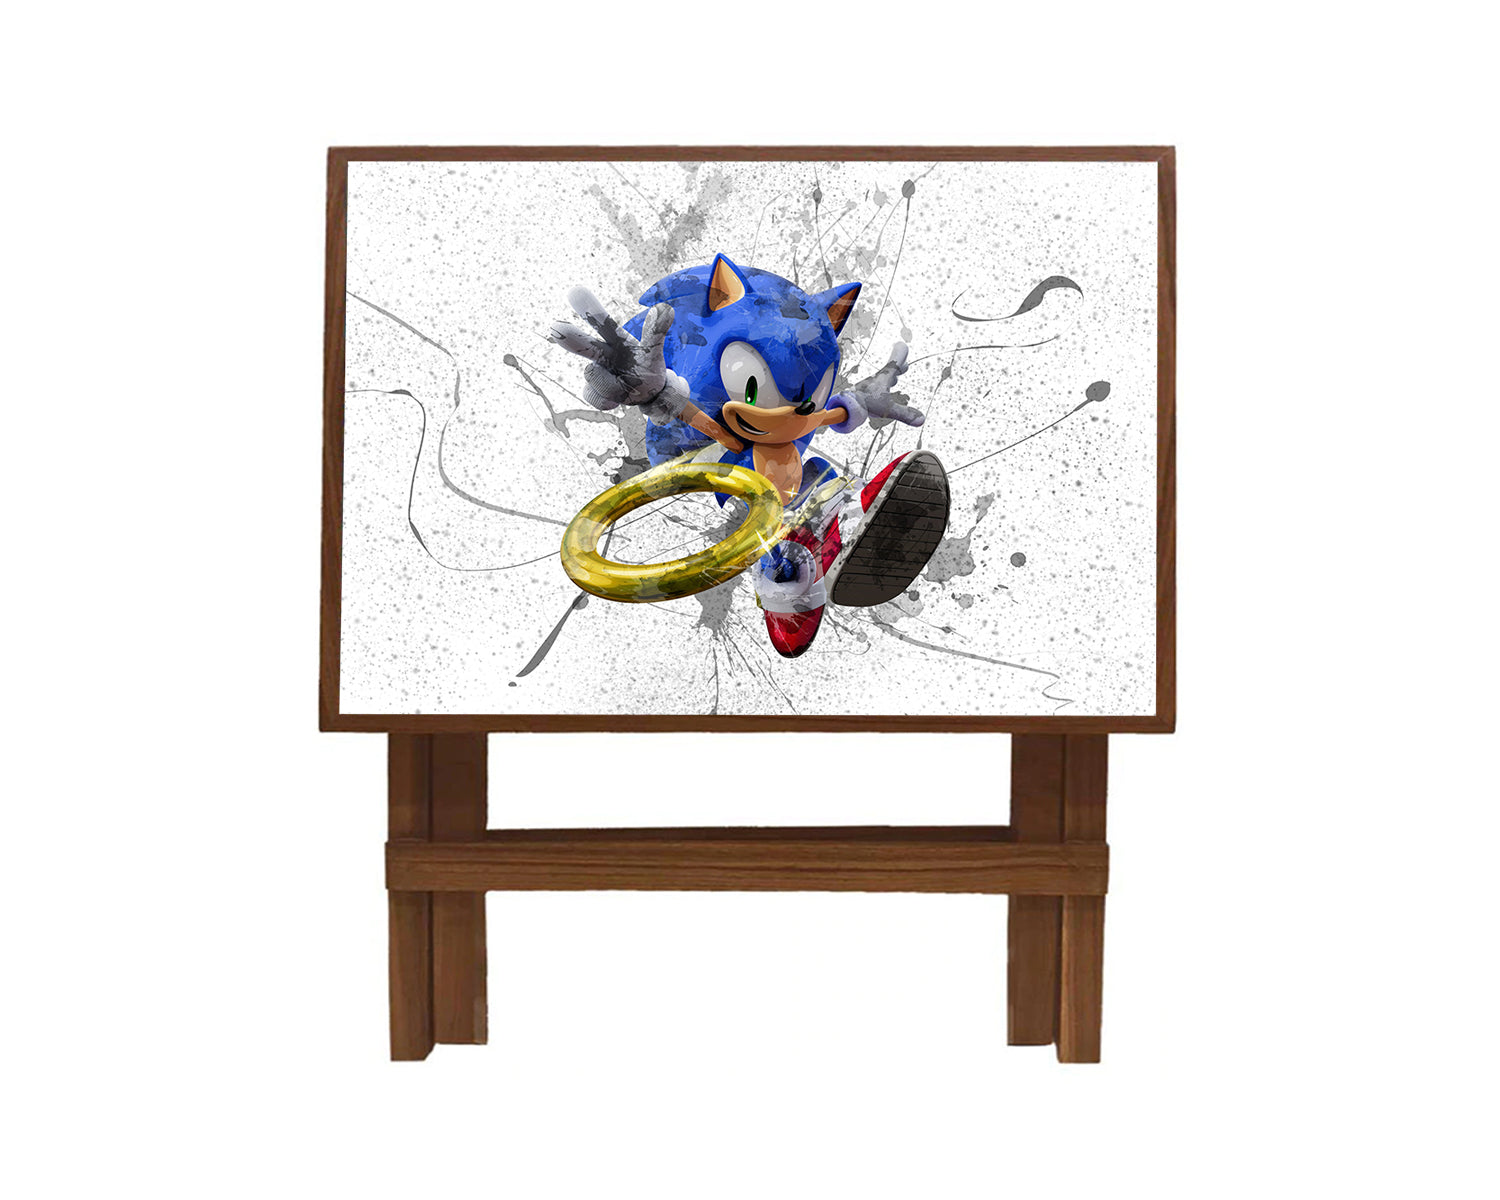 Sonic Splash Effect Coffee and Laptop Table 